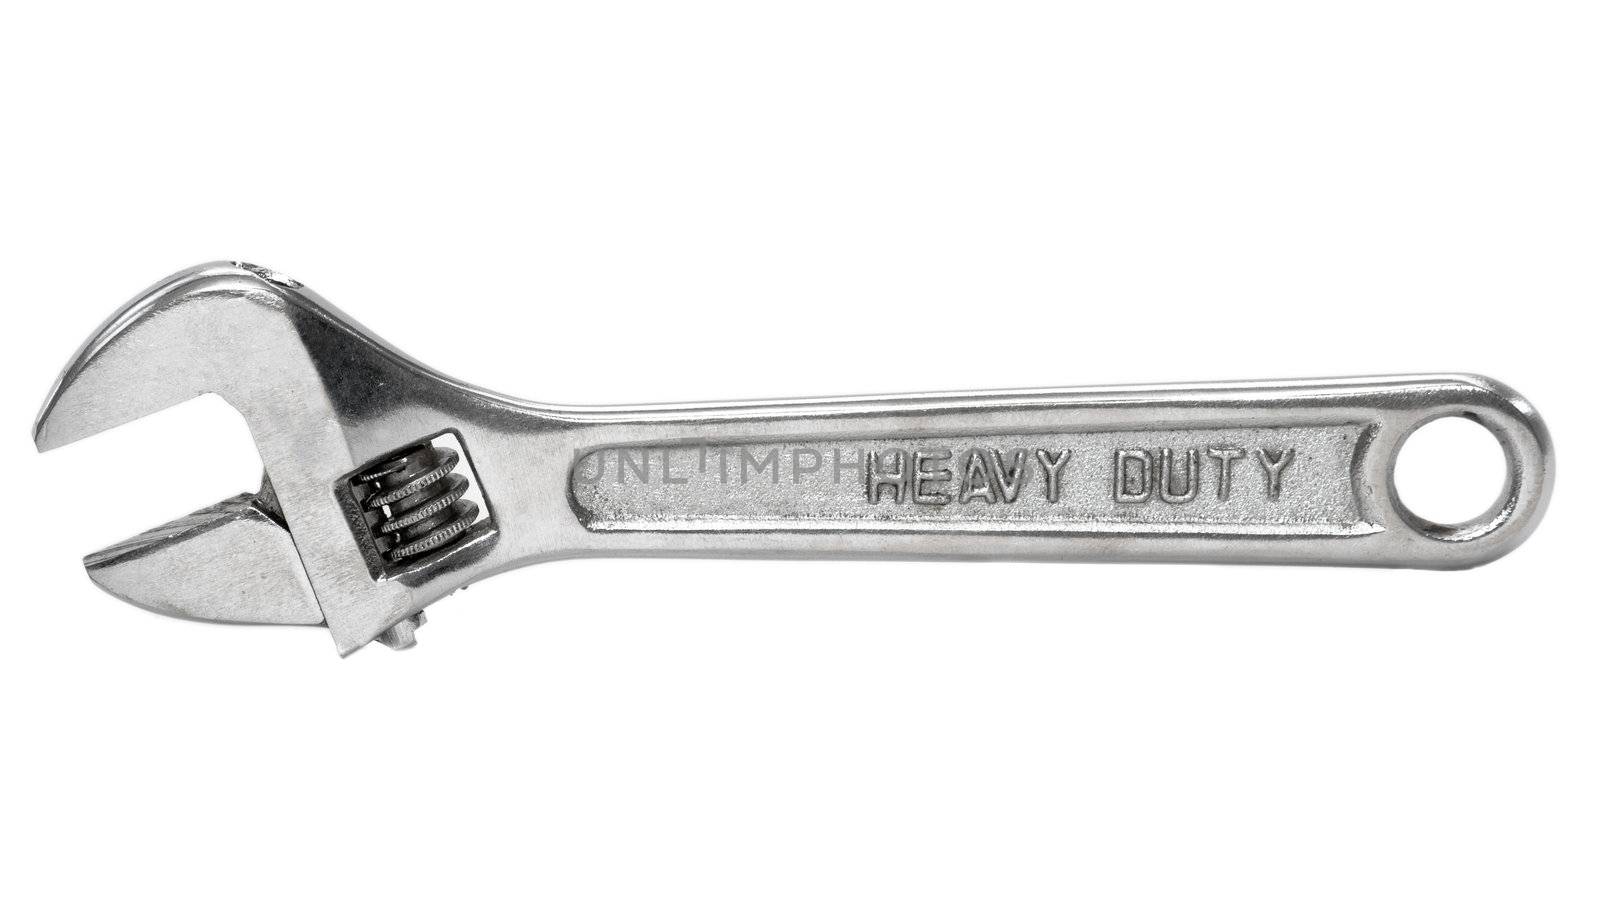 Heavy duty adjustable spanner on white isolated background